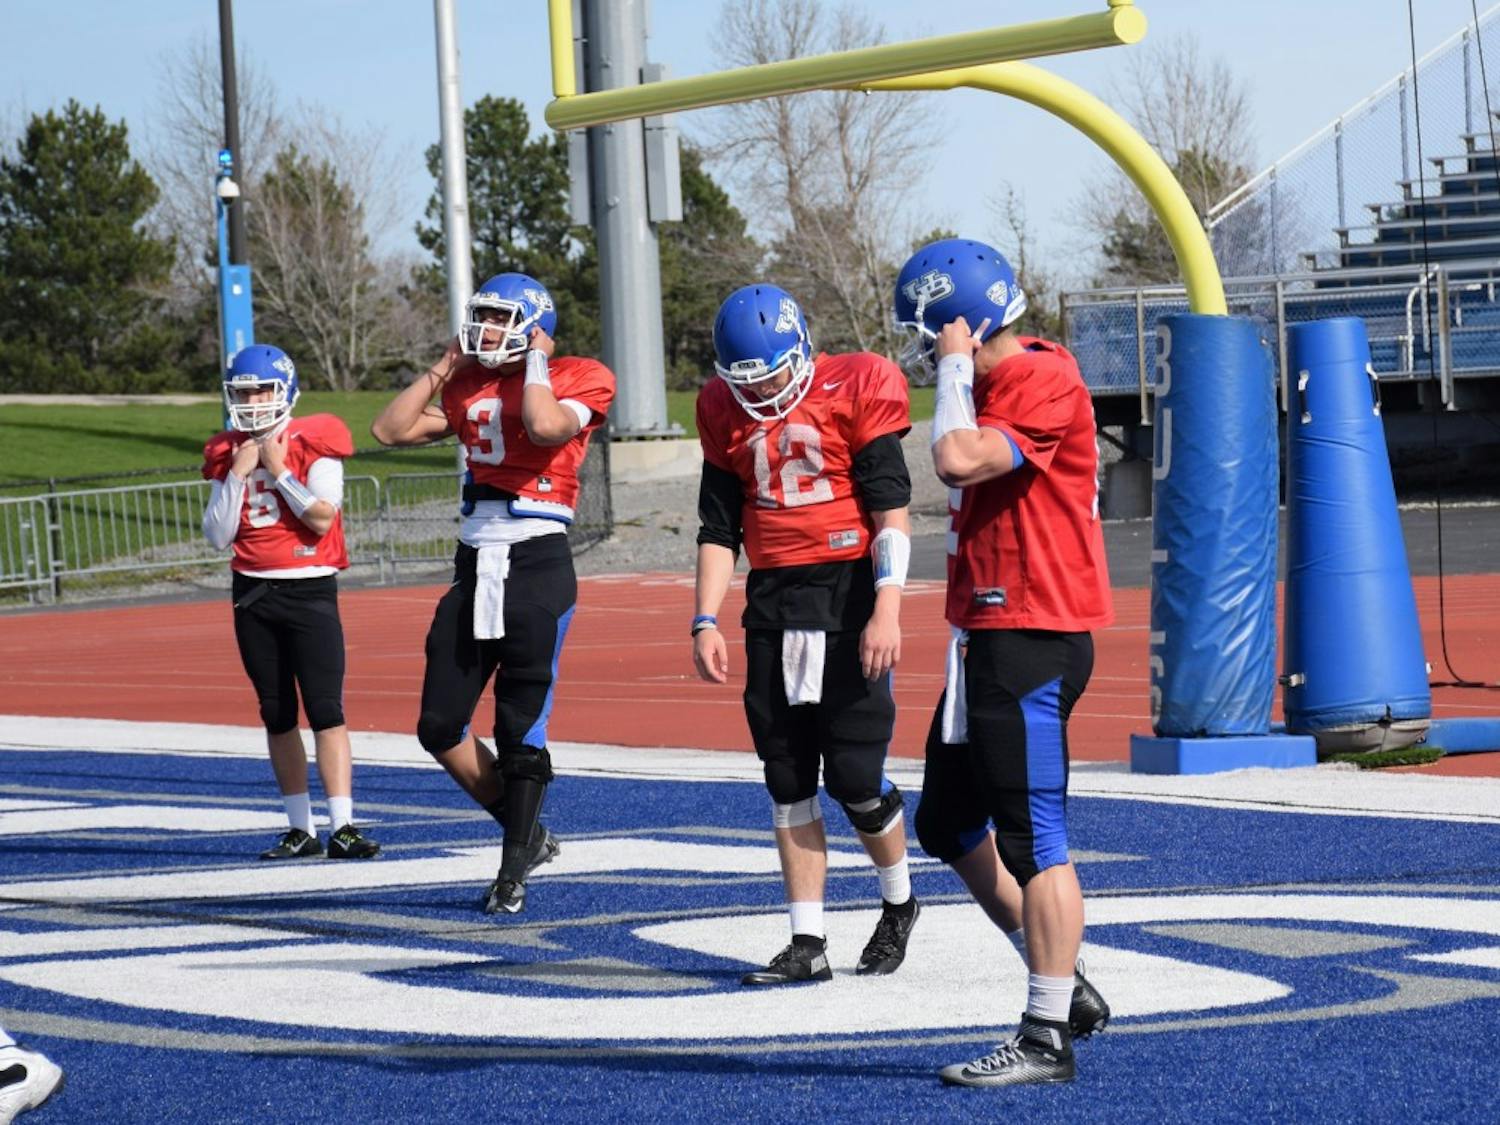 All UB quarterbacks&nbsp;are expected to see time on the field during the&nbsp;Blue and White game on Saturday, with the expectation that one can take a step forward and put himself in the driver’s seat heading into summer practices.